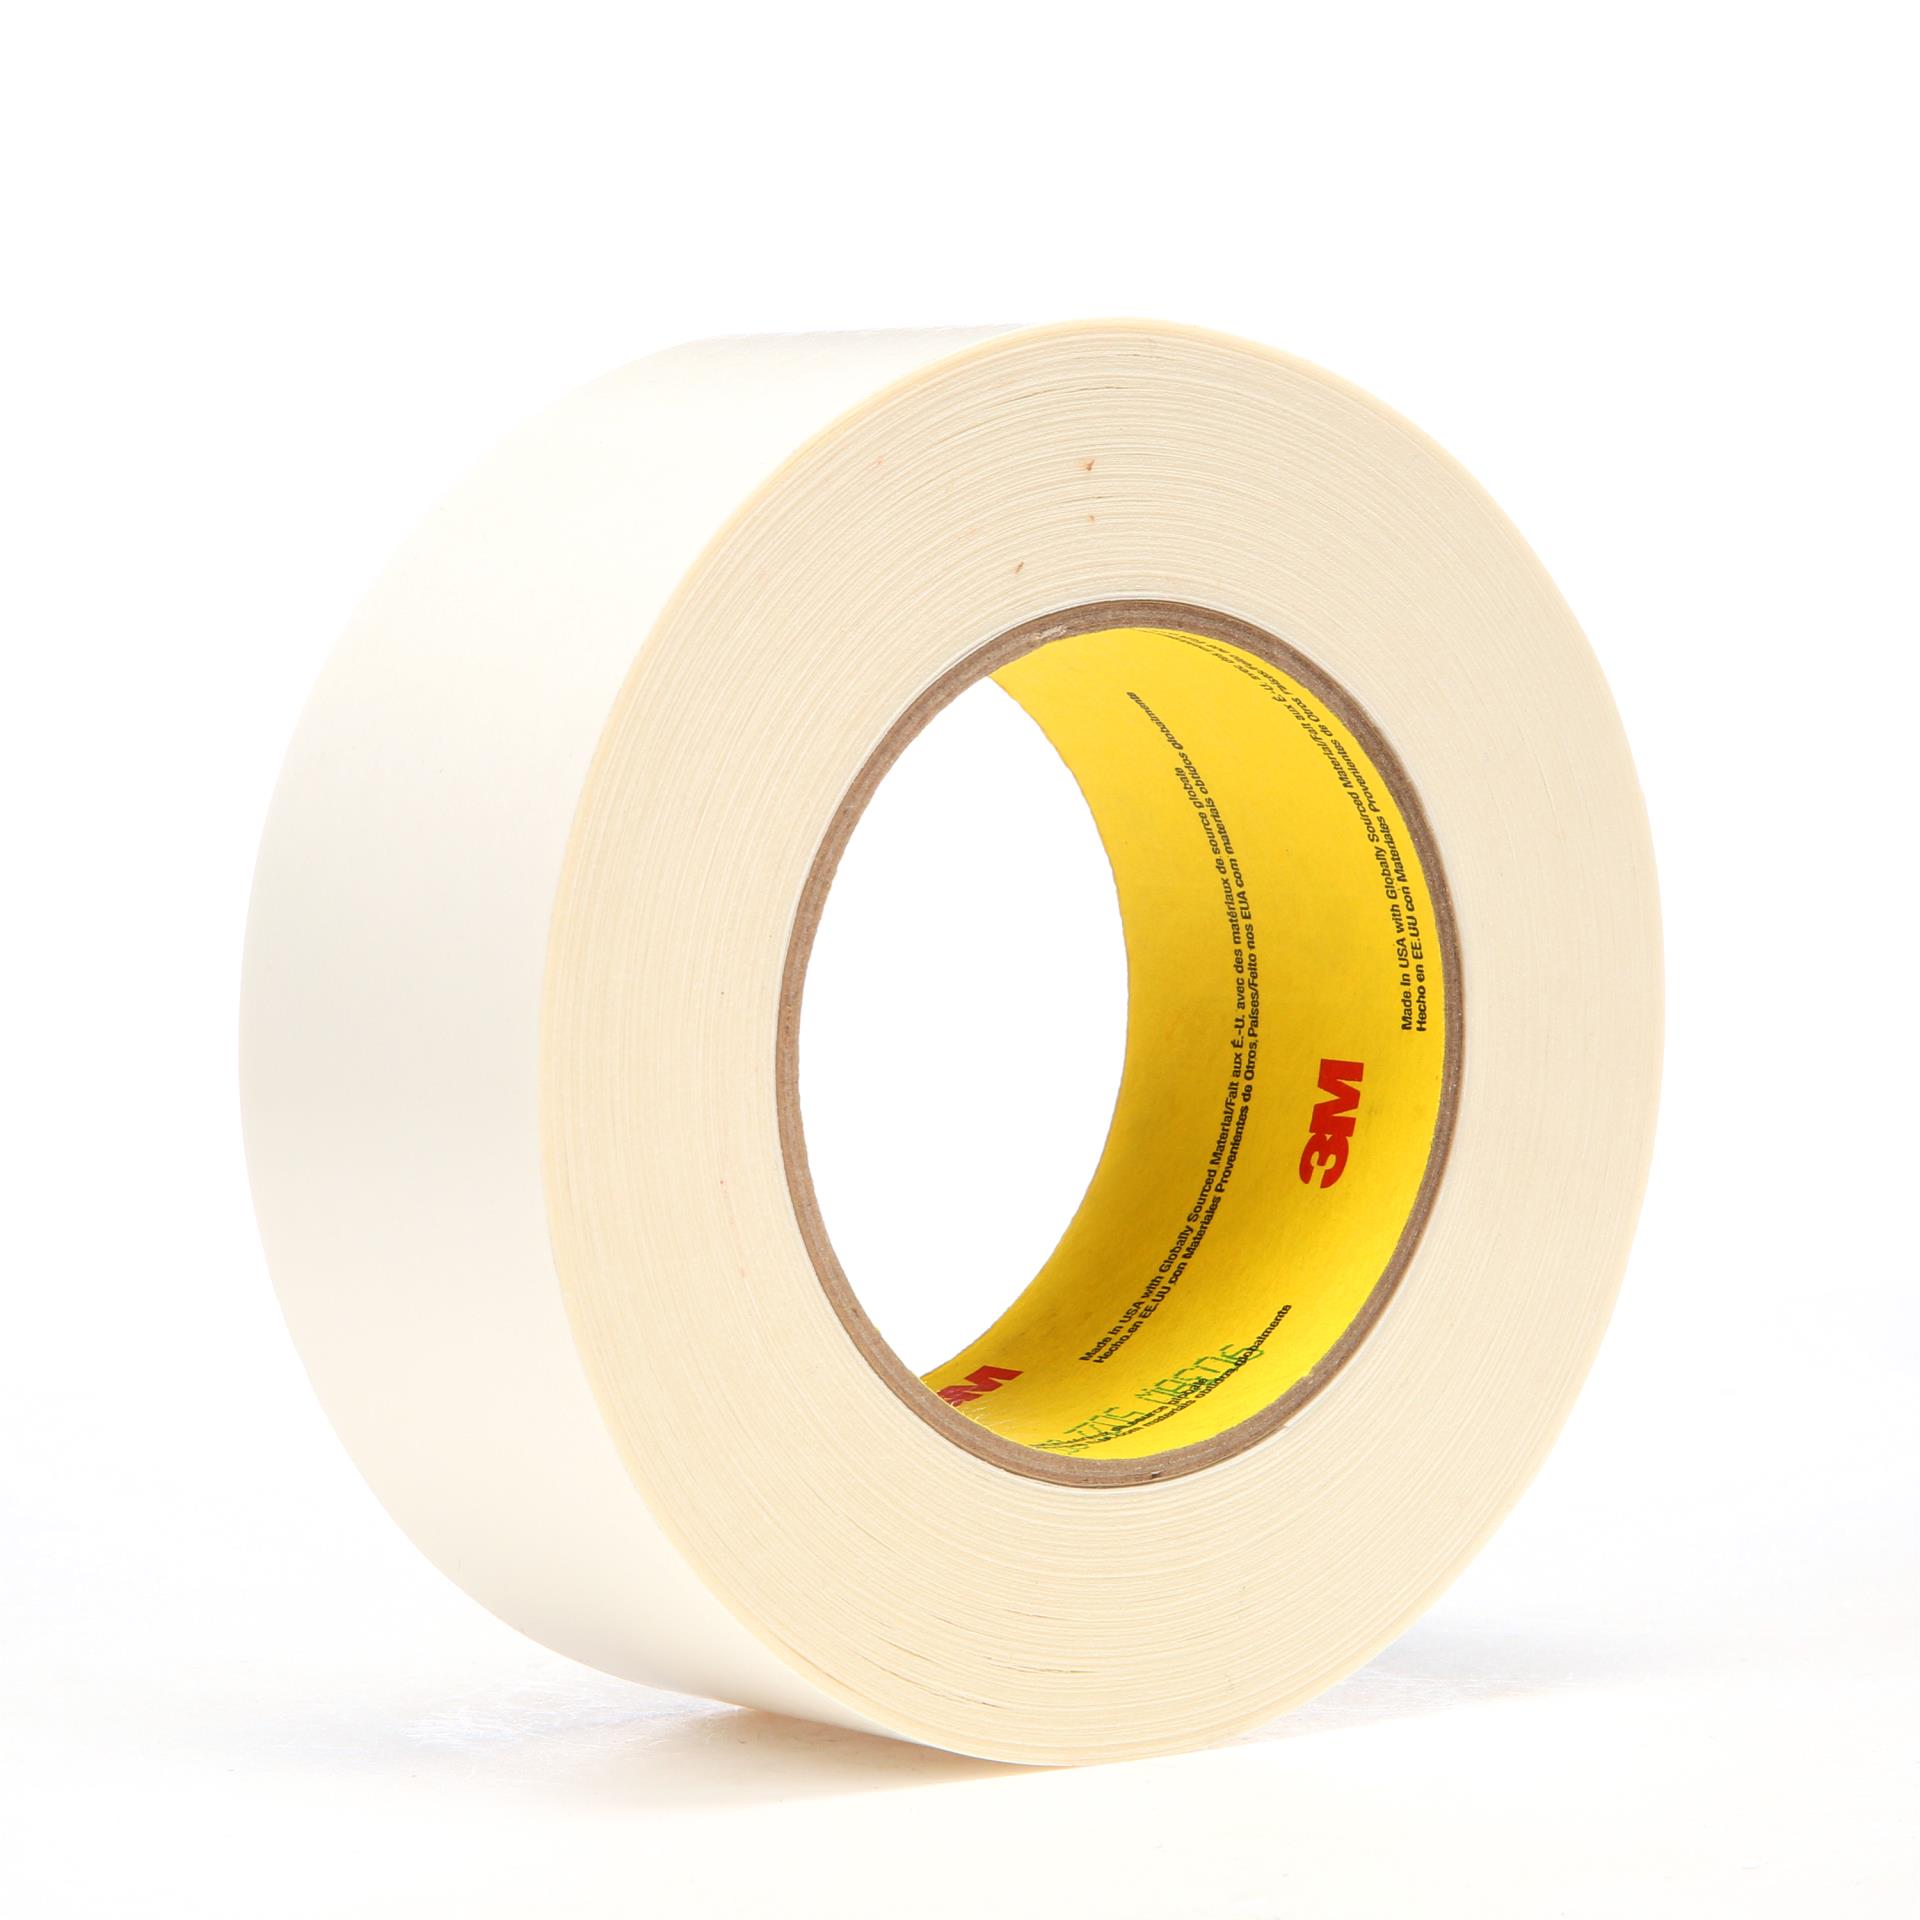 https://www.e-aircraftsupply.com/ItemImages/64/7100028064_3M_Repulpable_Double_Coated_Splicing_Tape_9038W_White.jpg